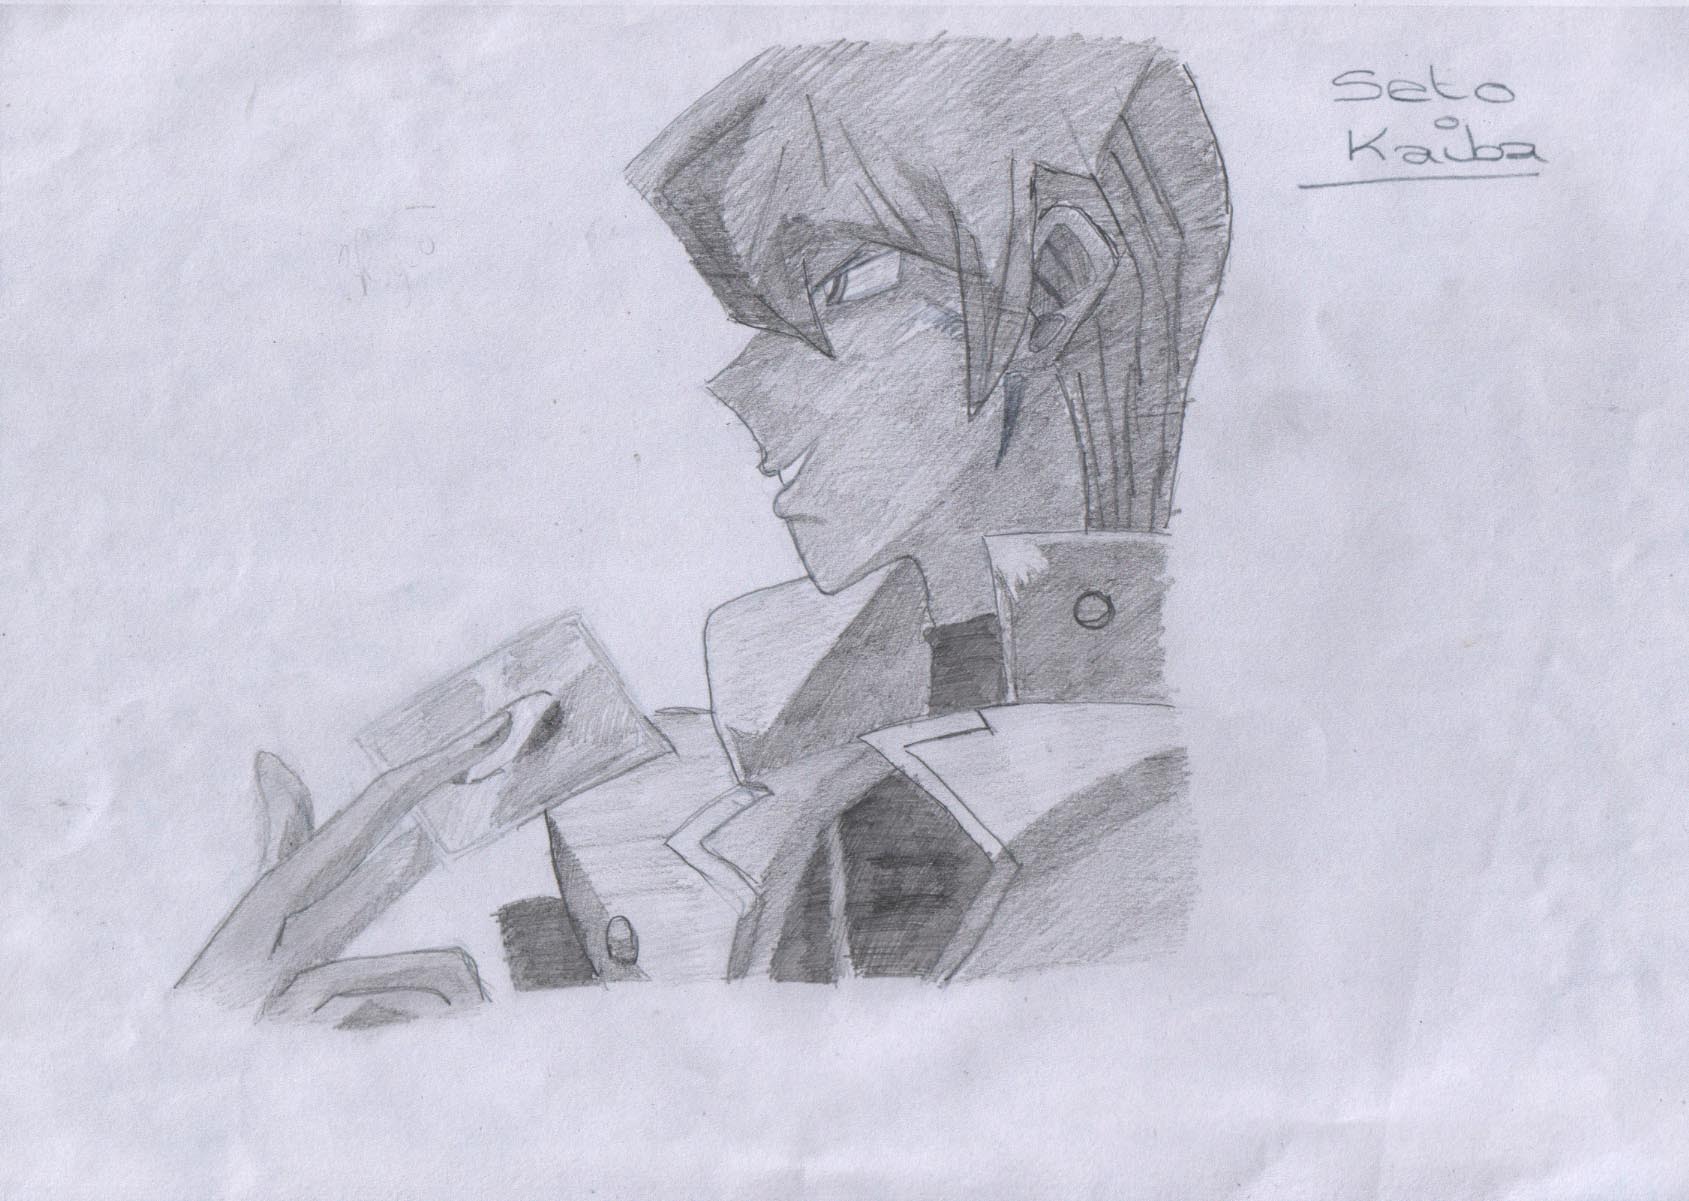 First pic of seto kaiba completed by Yamikitten4390